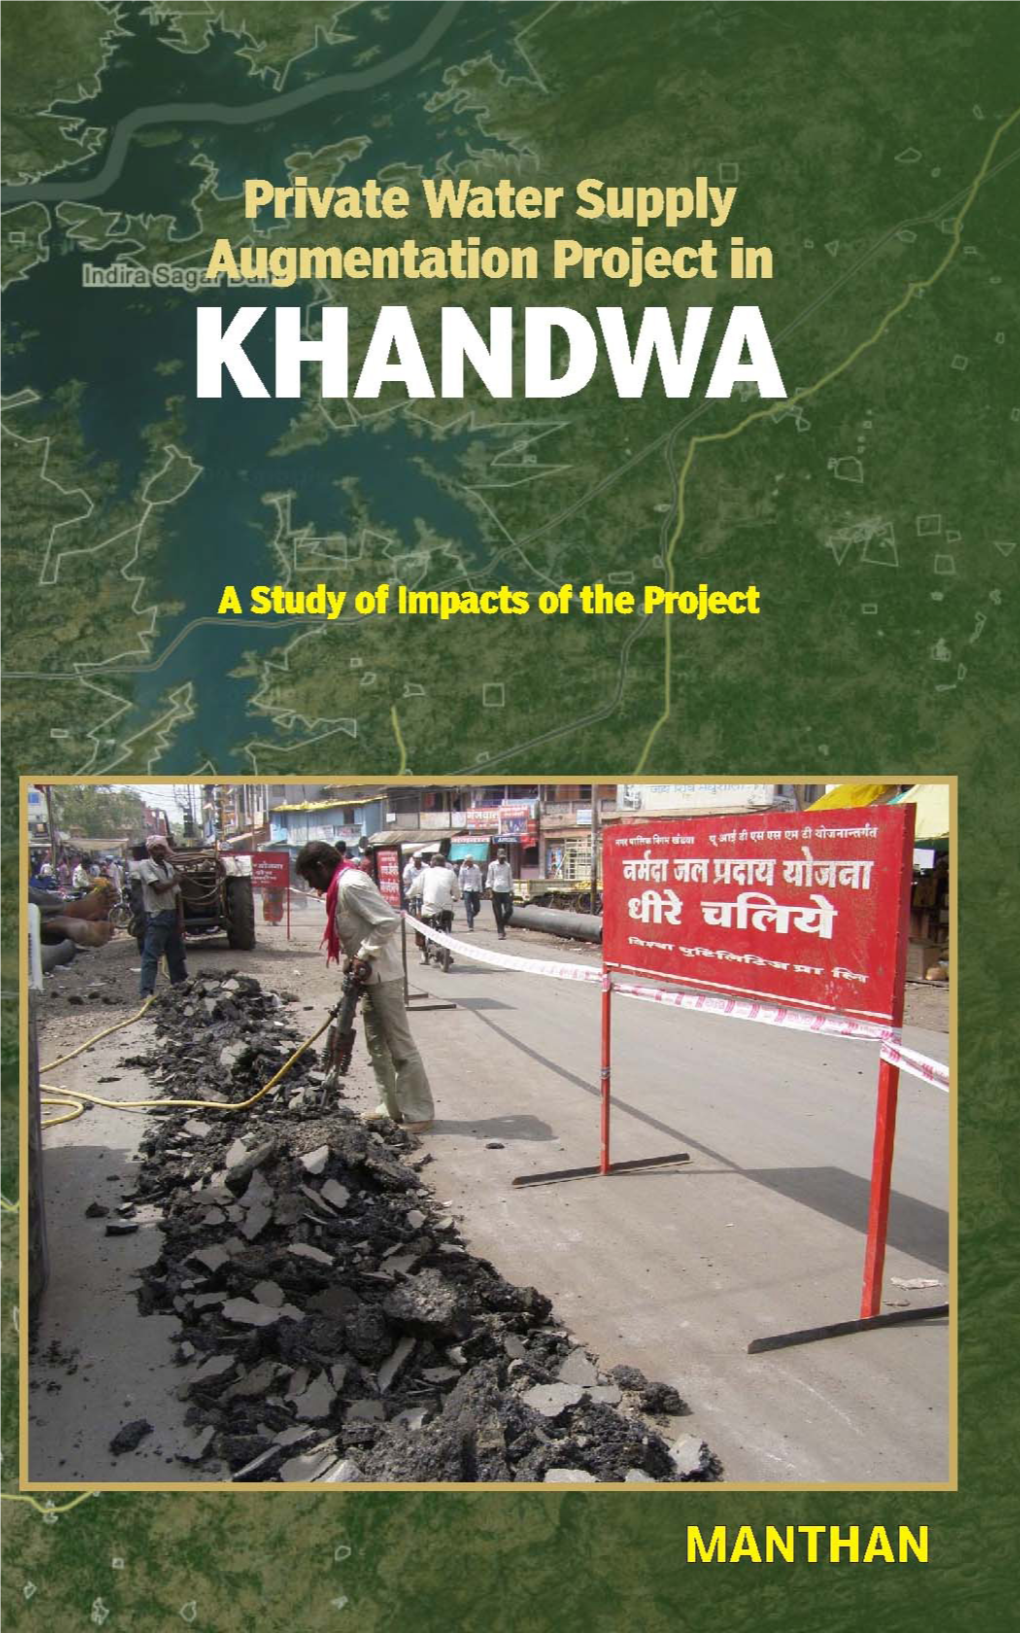 Khandwa Book FINAL.Pmd1 10/8/2011, 7:04 PM Private Water Supply Augmentation Project in Khandwa a Study of Impacts of the Project